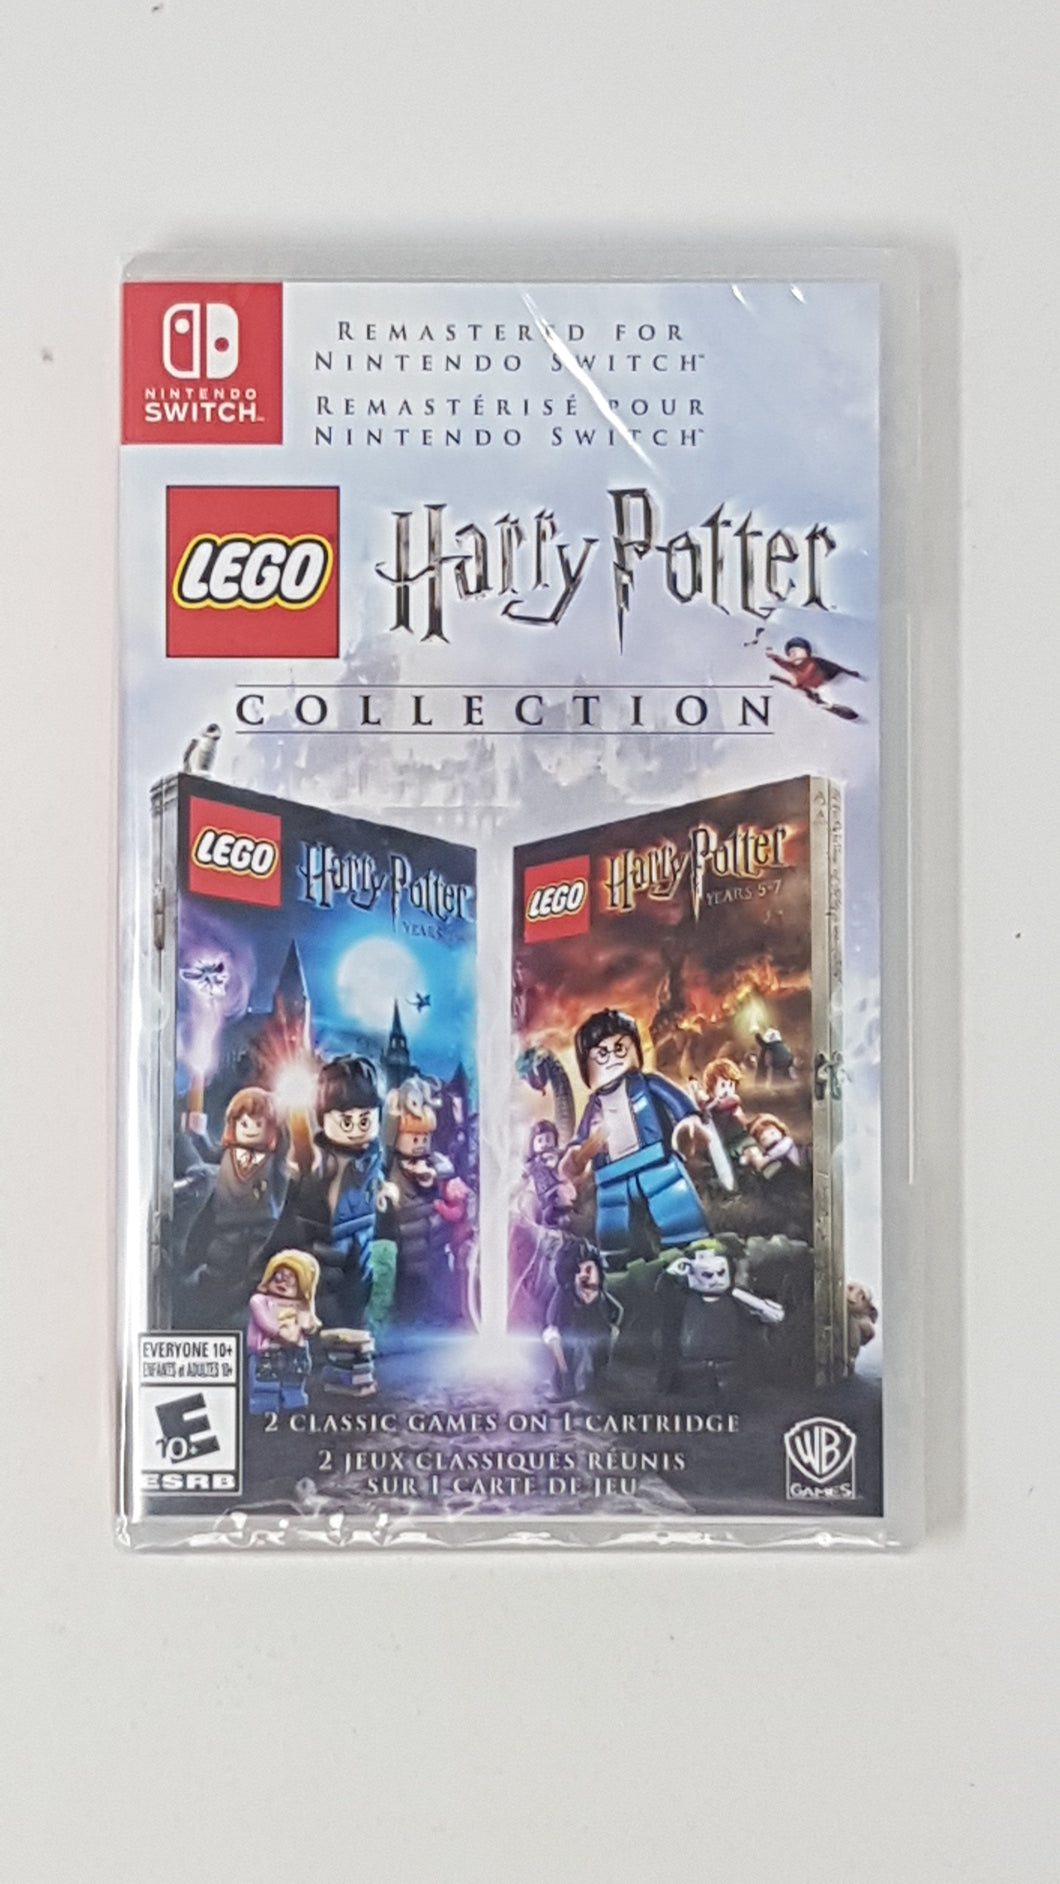 LEGO Harry Potter Collection [new] - Nintendo Switch